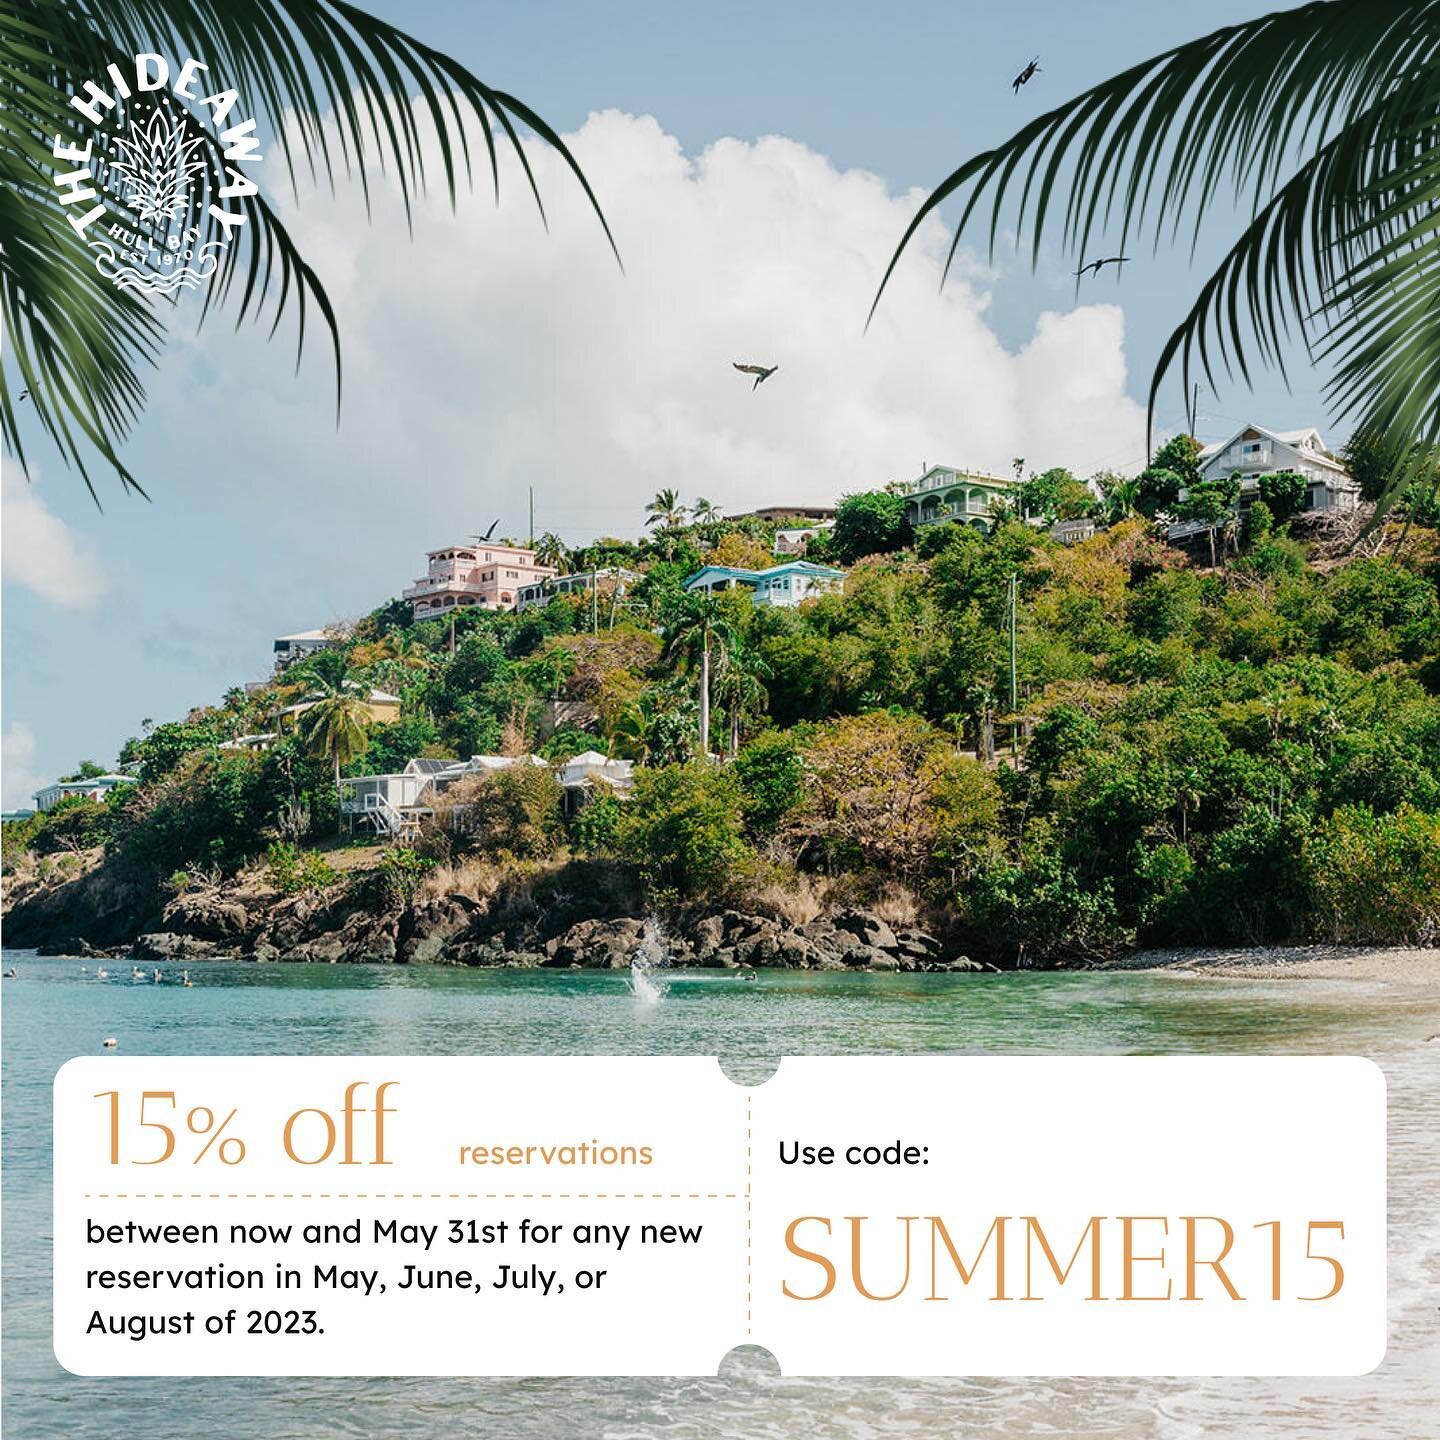 Summertime is just around the corner &rarr; Come stay w/ us at The Hideaway where you can soak in all the sun + sand + tropical vibes ☀️🌴 Book NOW thru May 31st for 15% off all reservations May - August!!

#stthomas #stthomasvirginislands #stthomasu